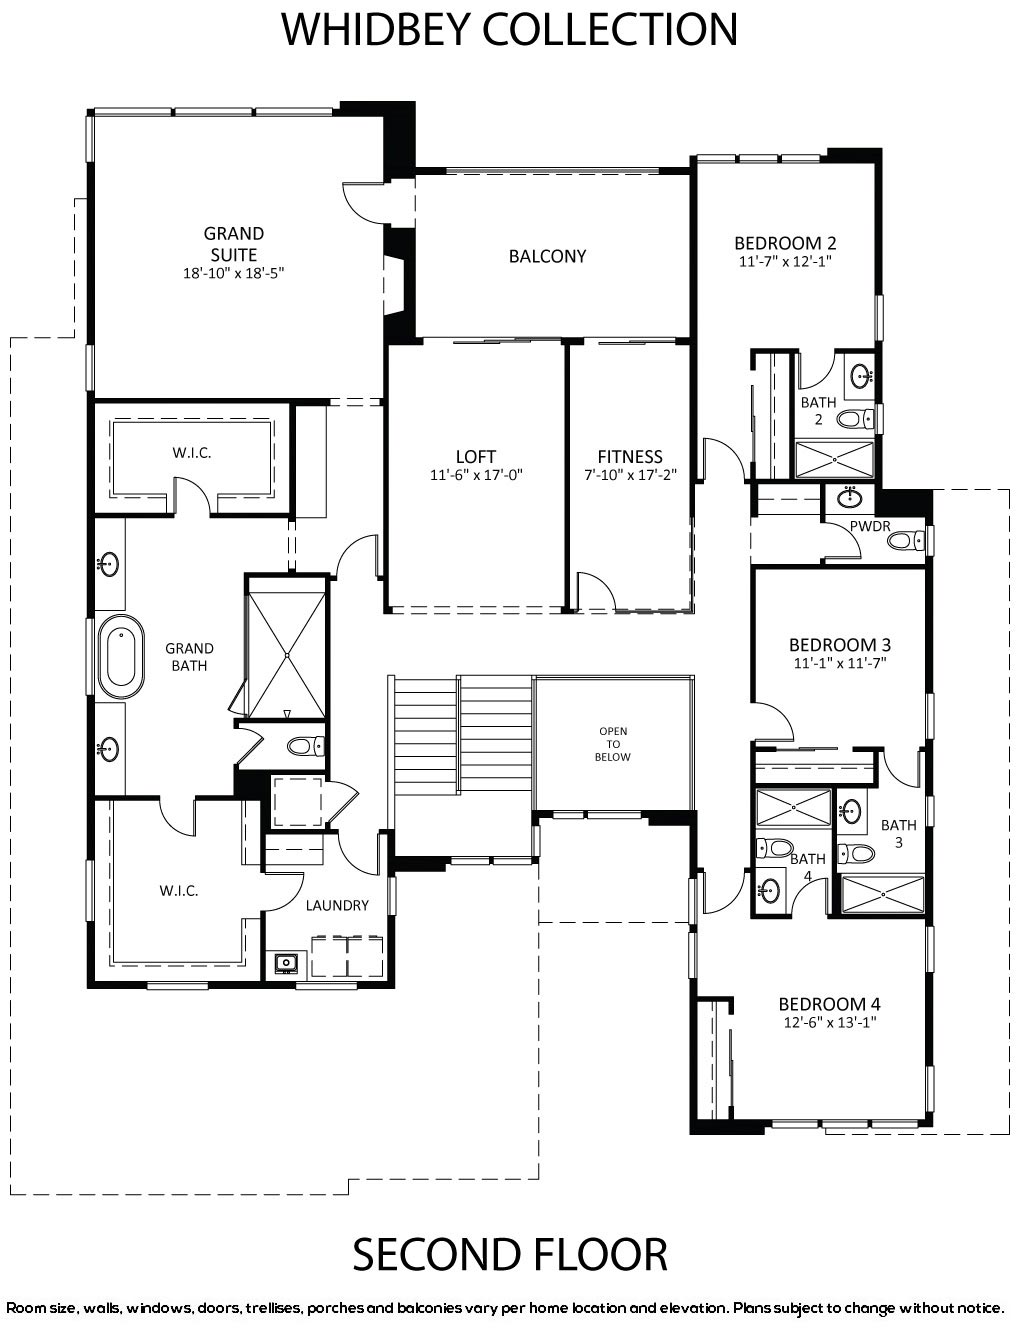 Homesite 2 Whidbey Collection Second Floor